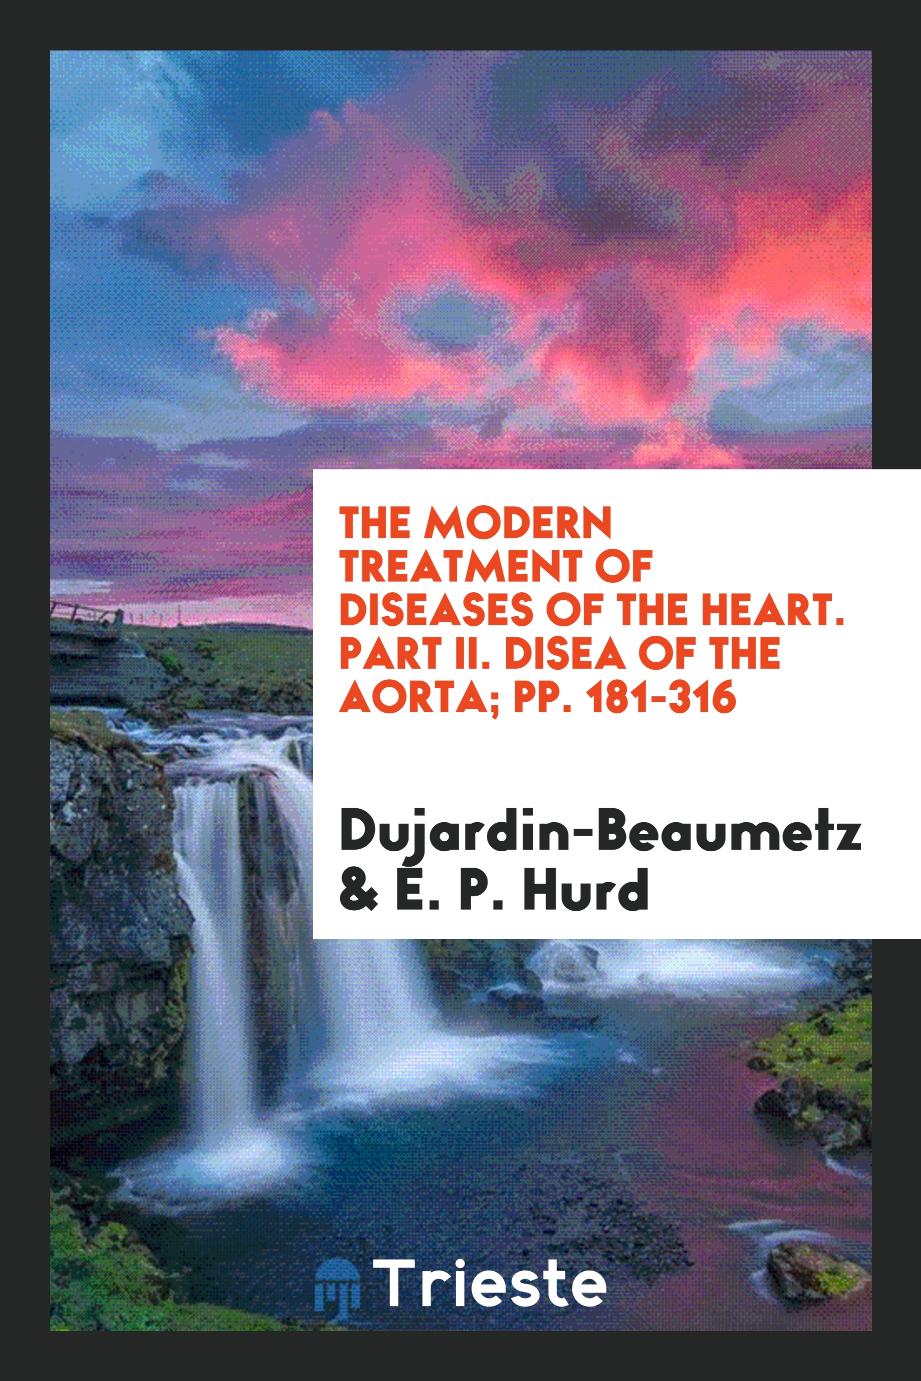 The Modern Treatment of Diseases of the Heart. Part II. Disea of the Aorta; pp. 181-316